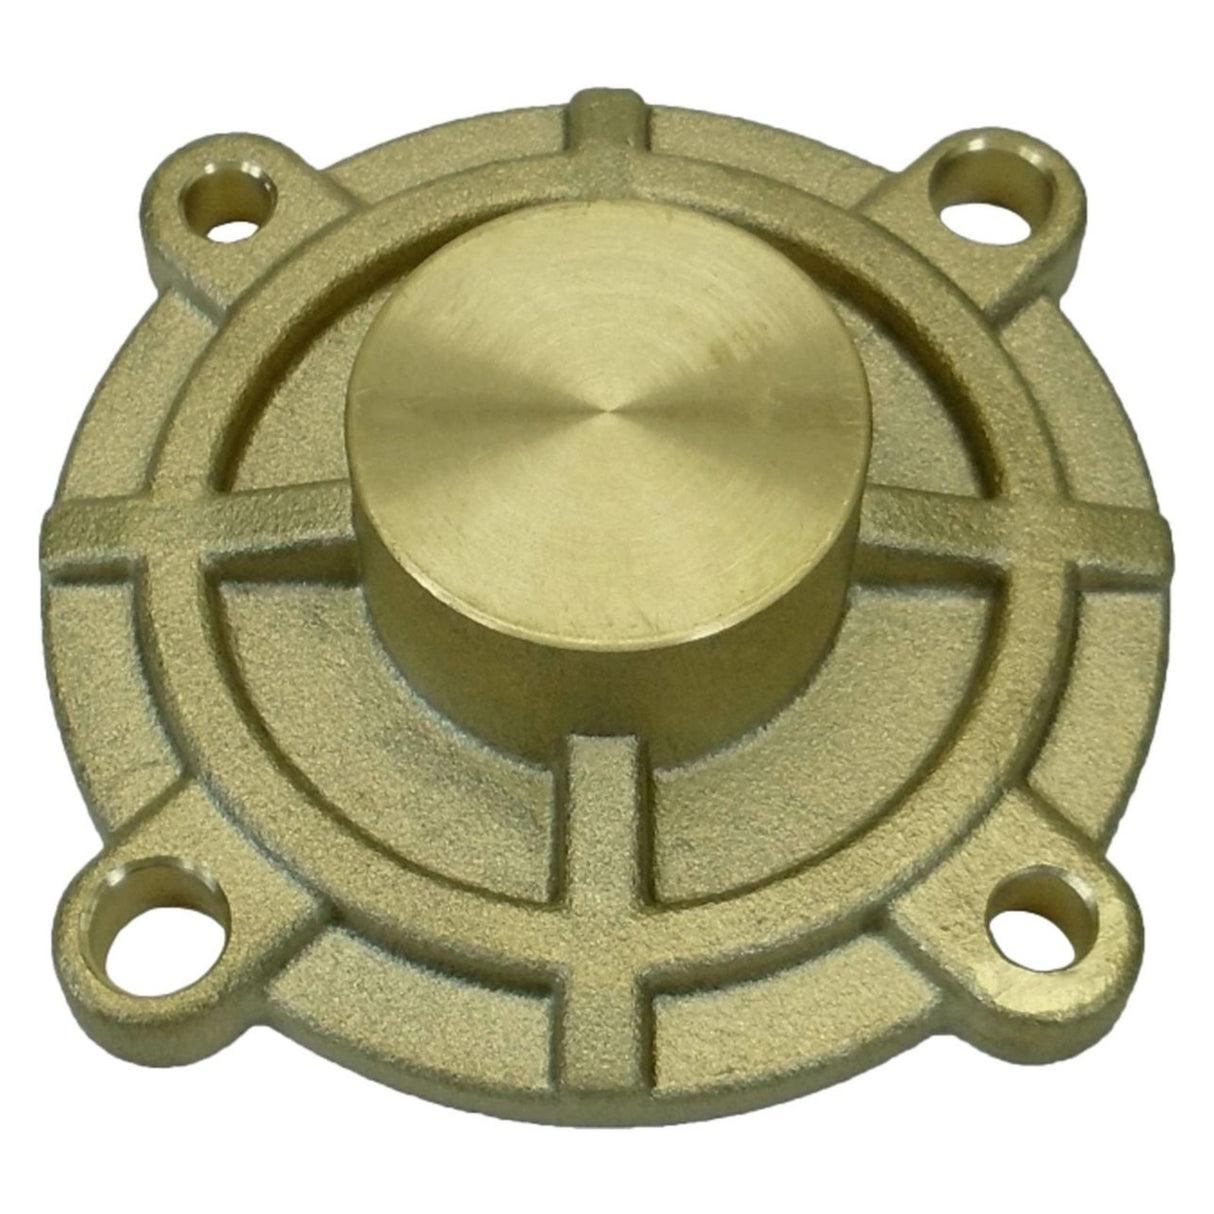 Johnson End Cover Plate for Johnson F5B-902 Engine Cooling Pumps